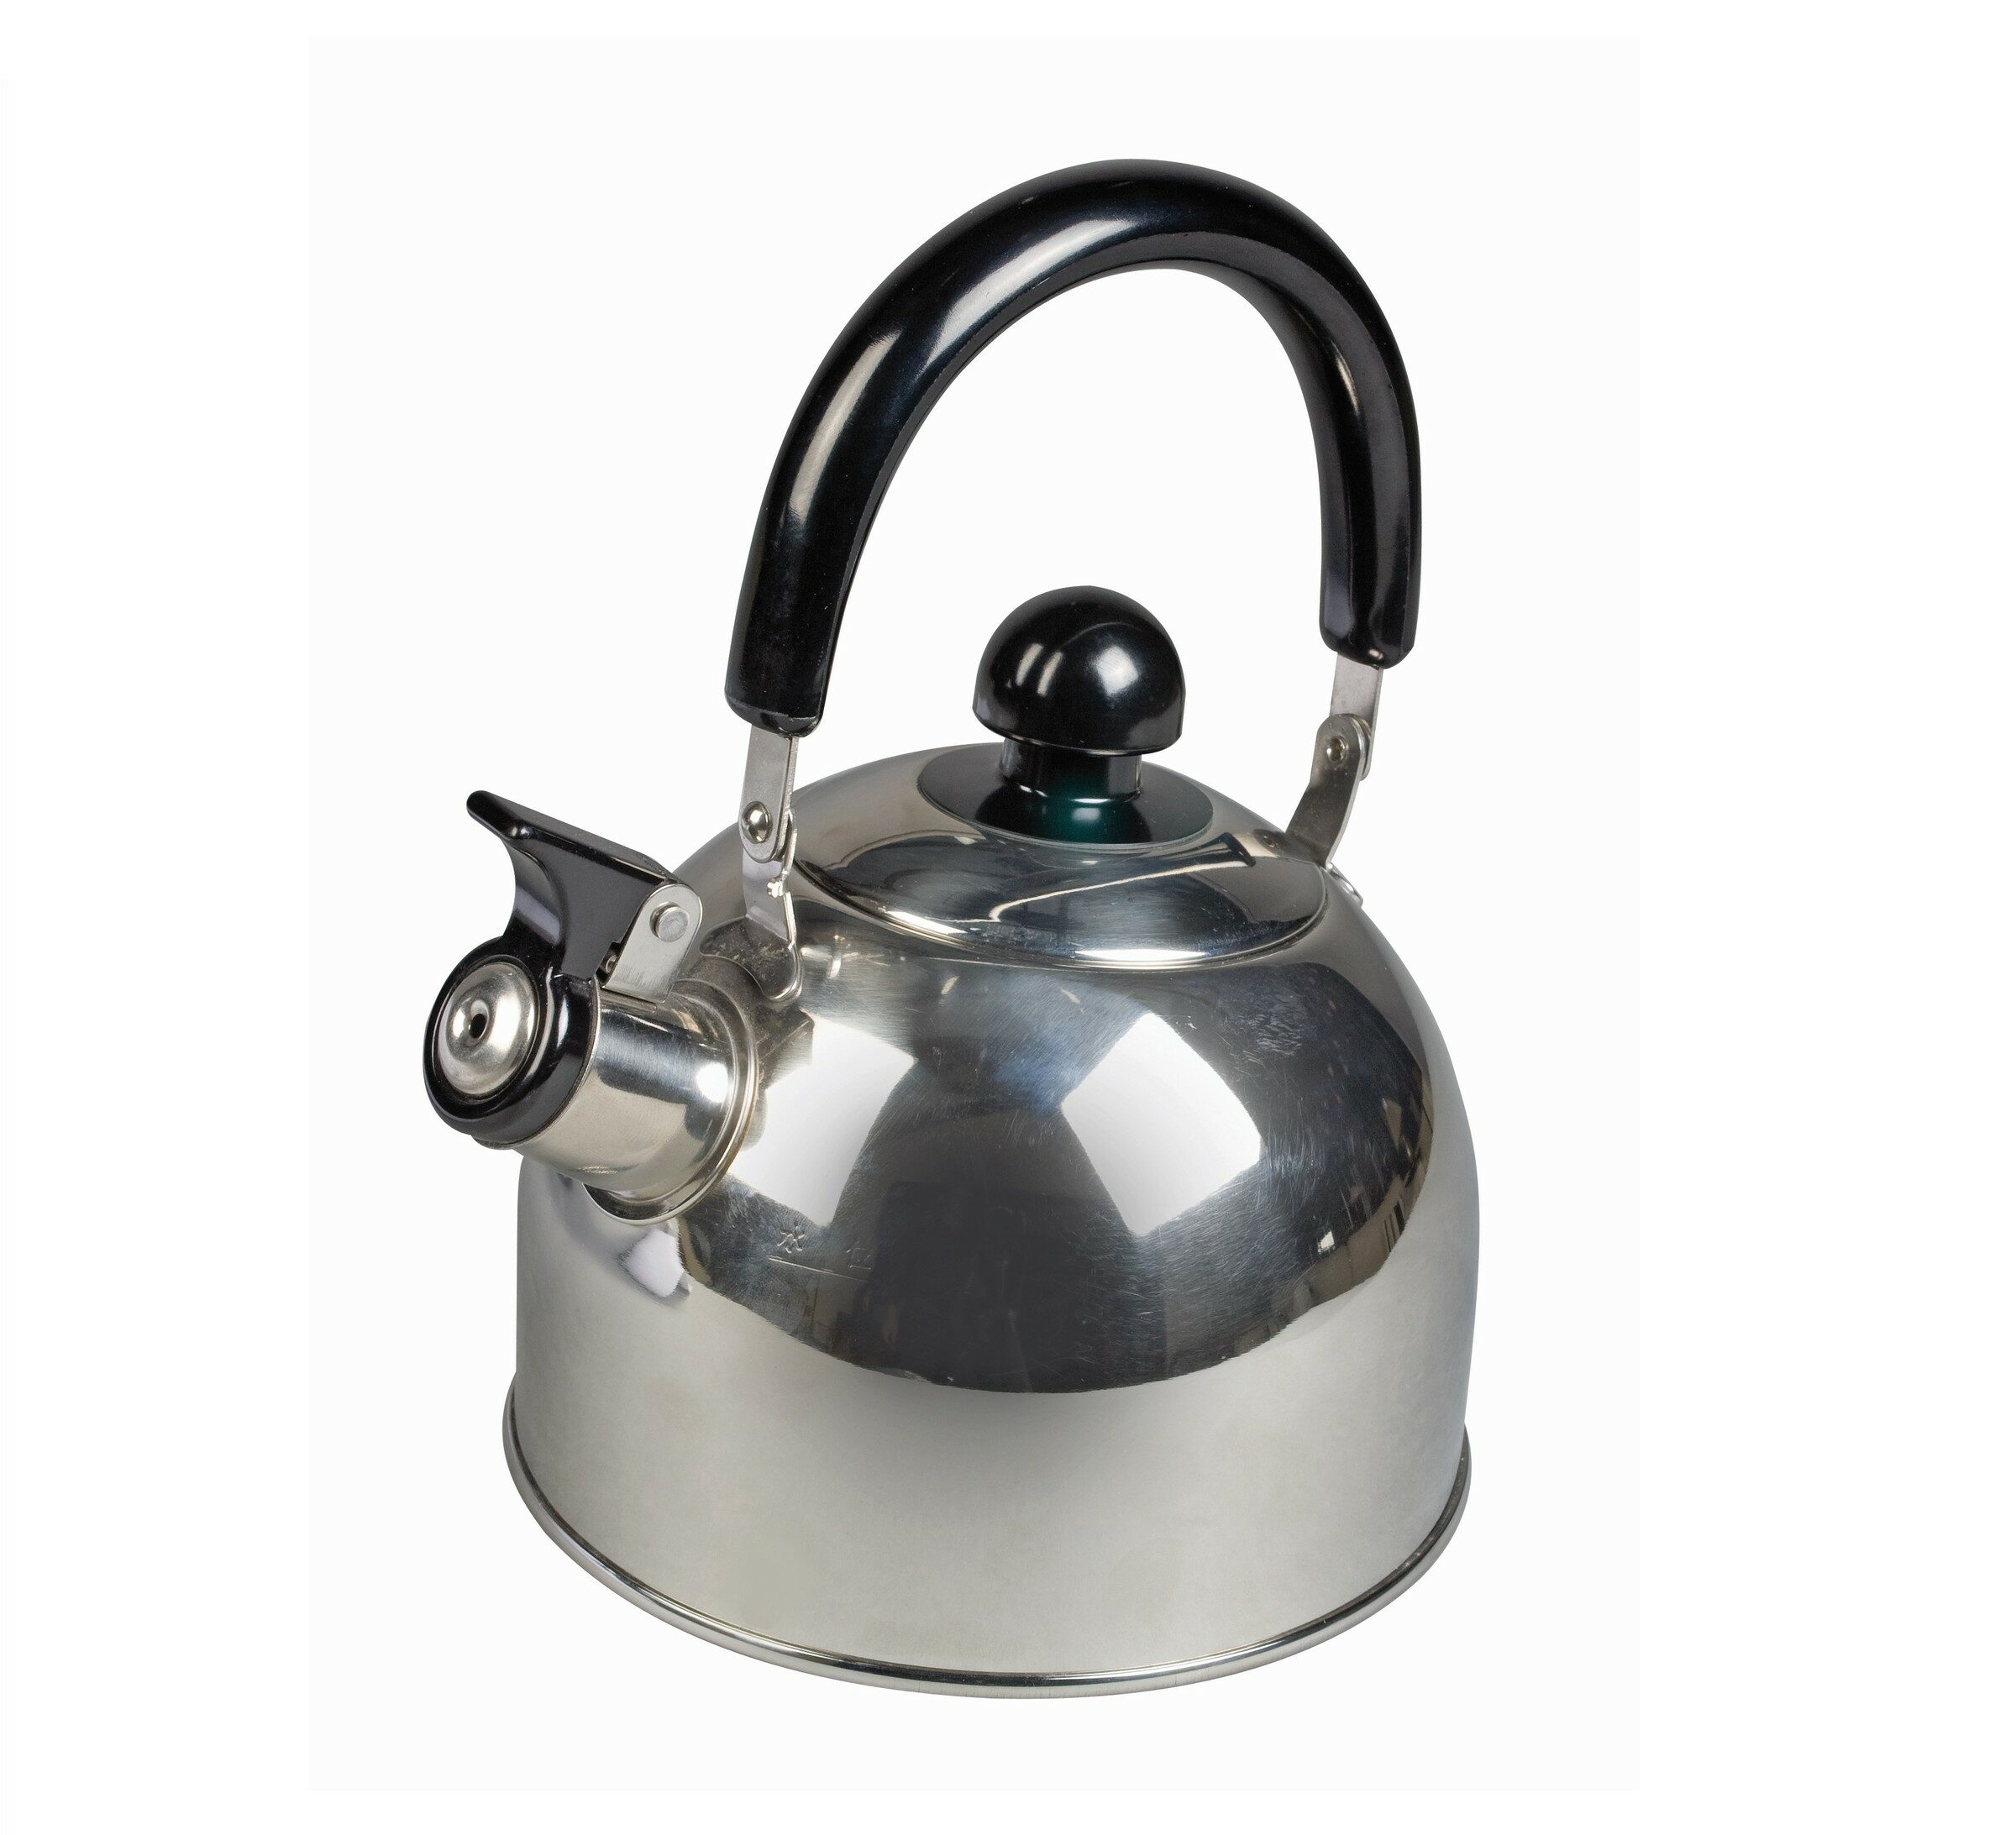 Kampa Polly Stainless Steel Kettle